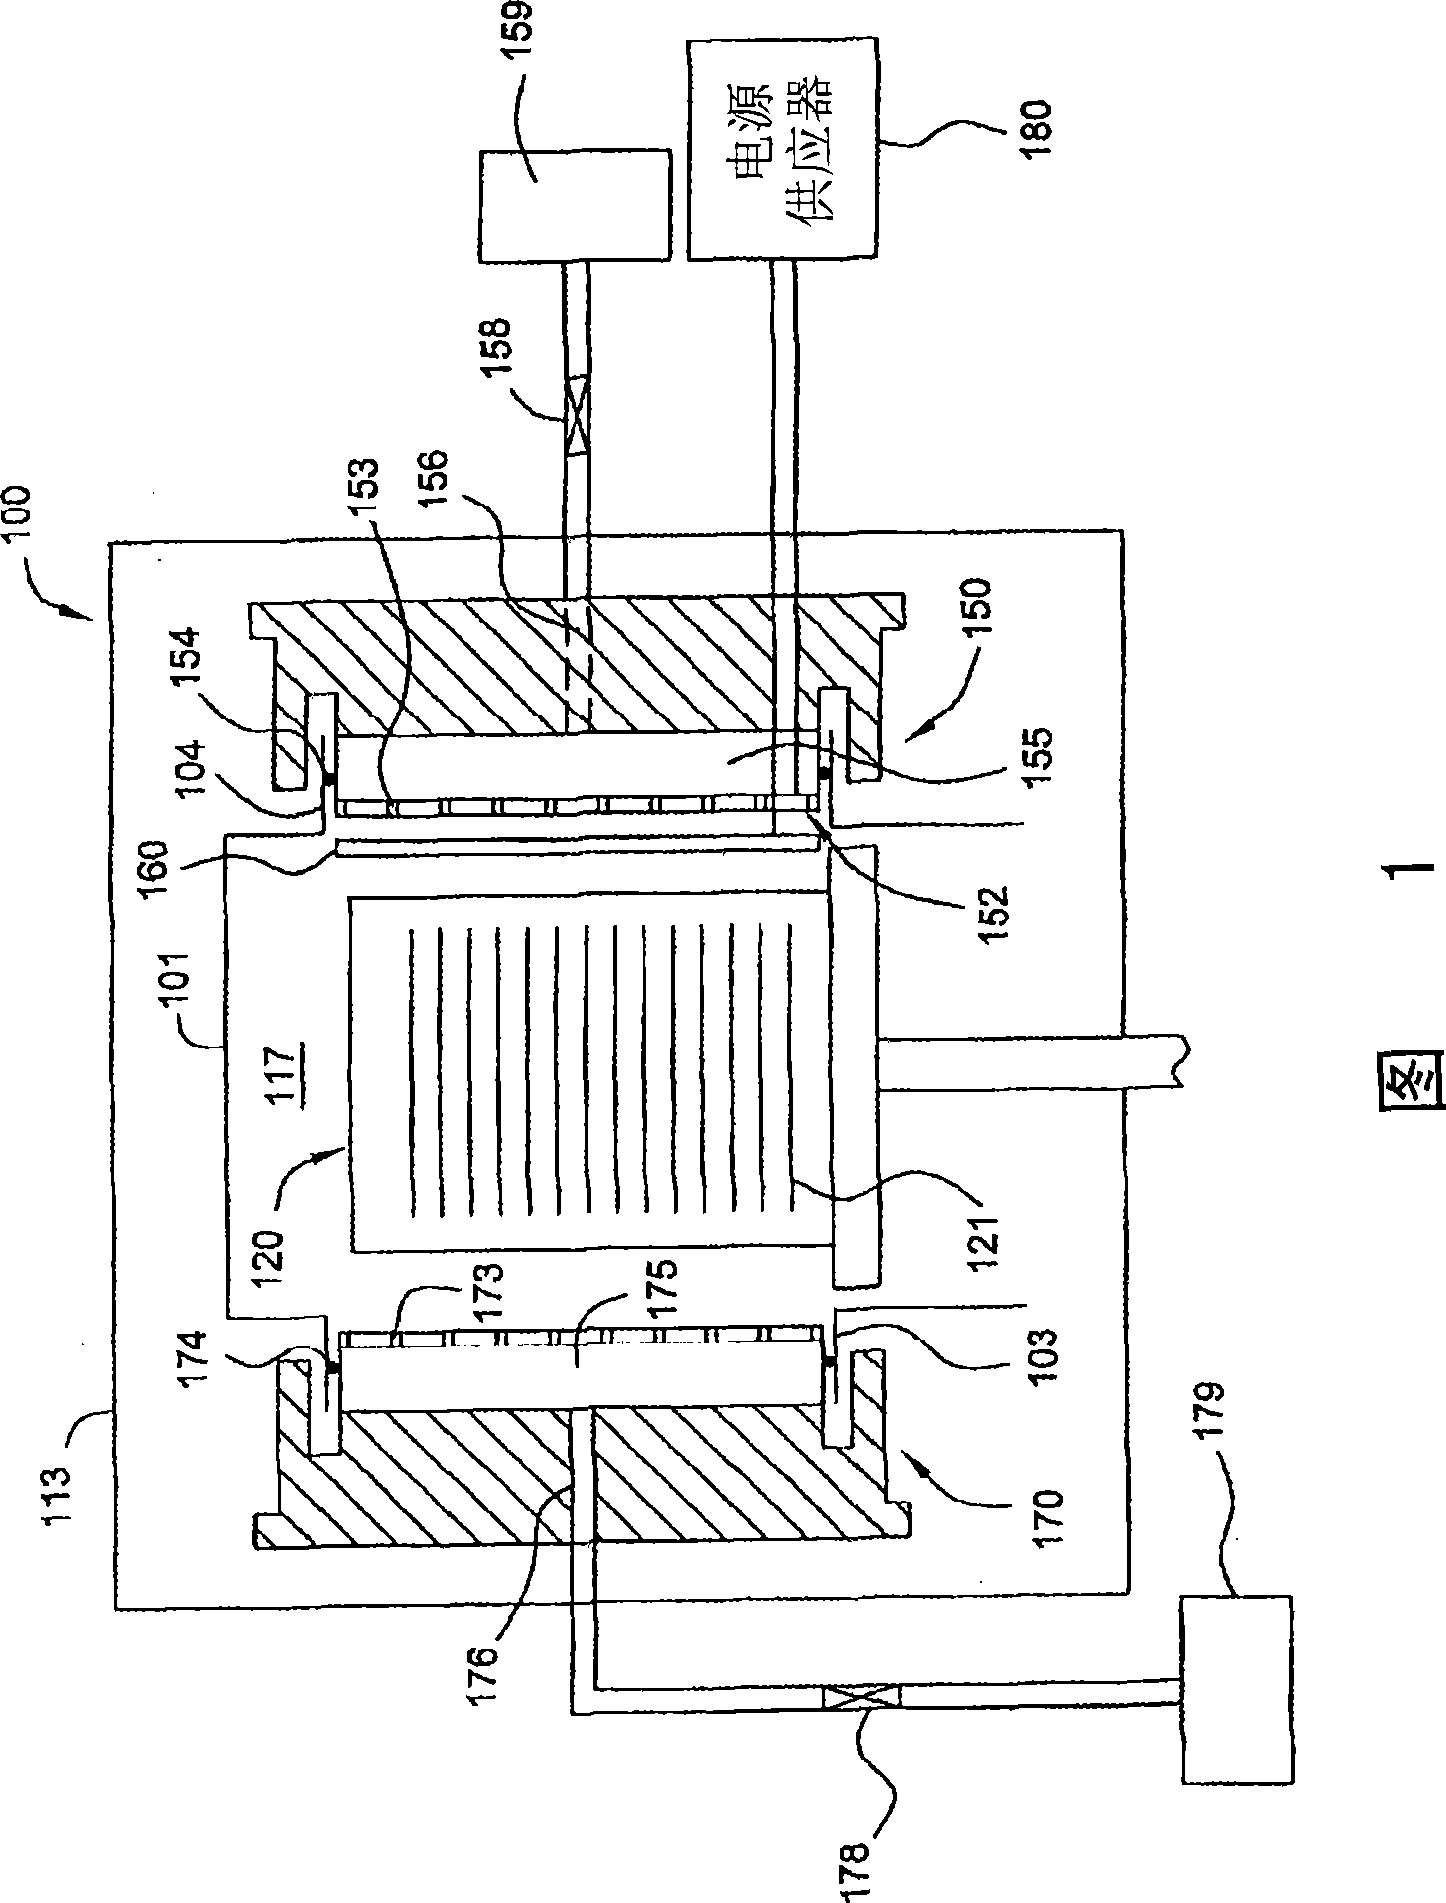 Method and apparatus for photo-excitation of chemicals for atomic layer deposition of dielectric film